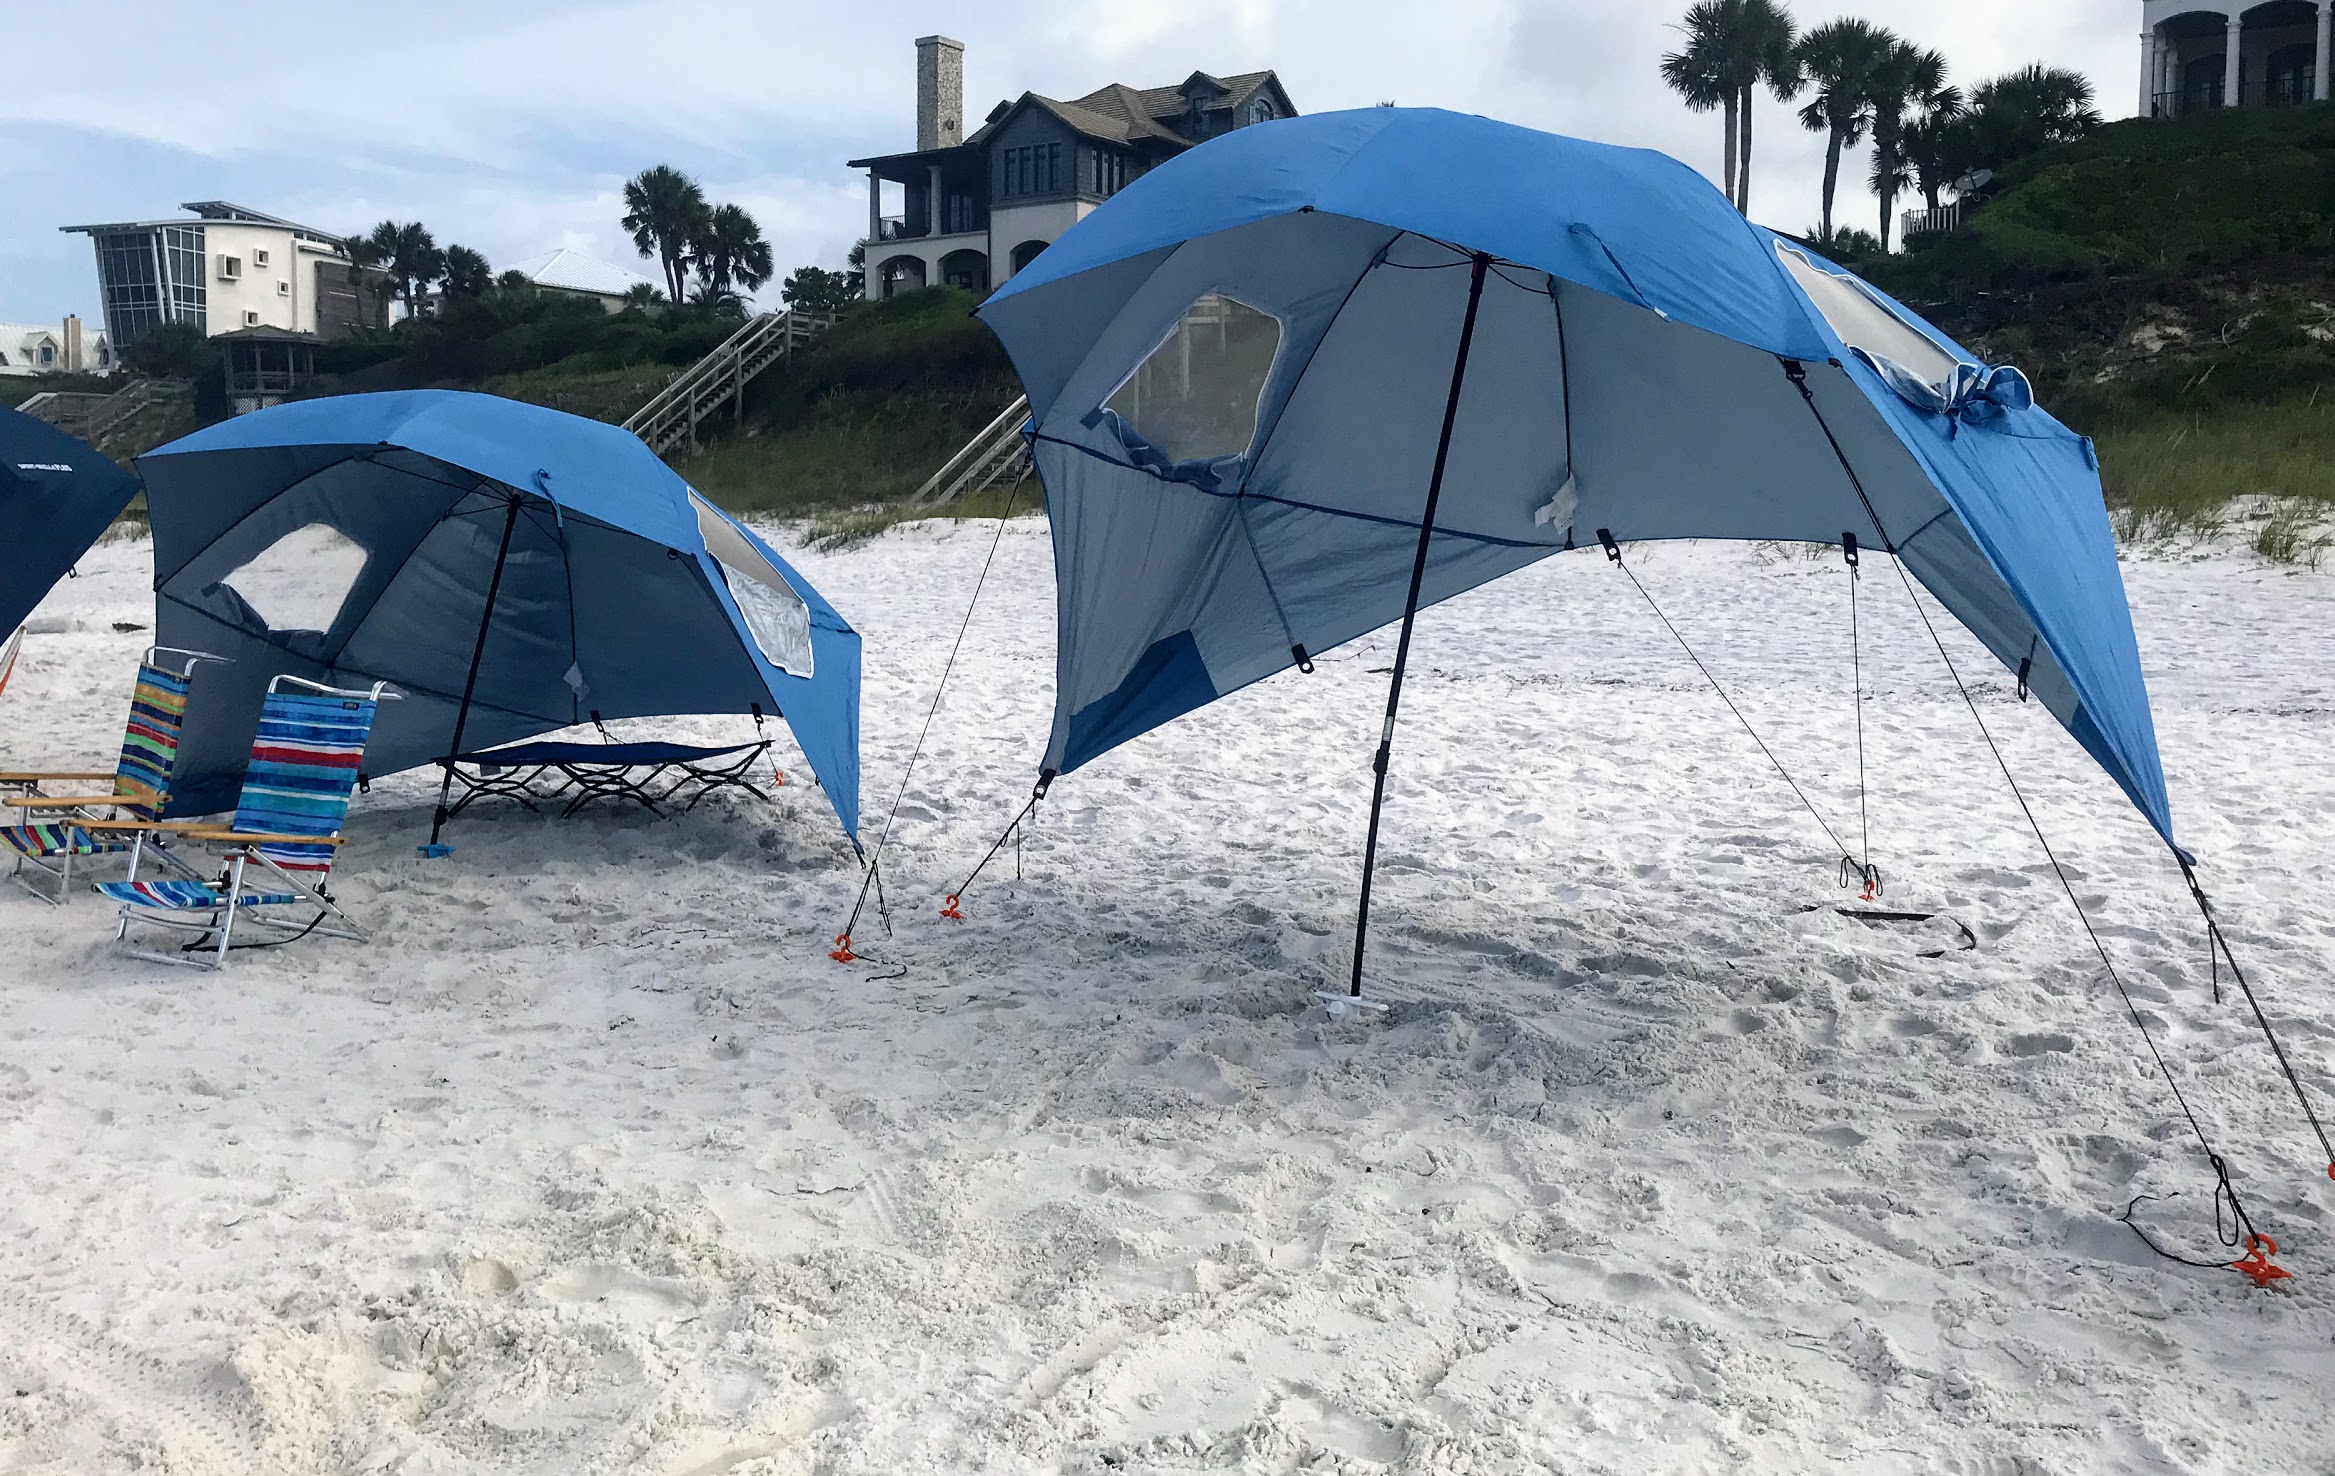 Best Beach Umbrella - Easy to Put Up, Stays Up and Keeps the Sun Out